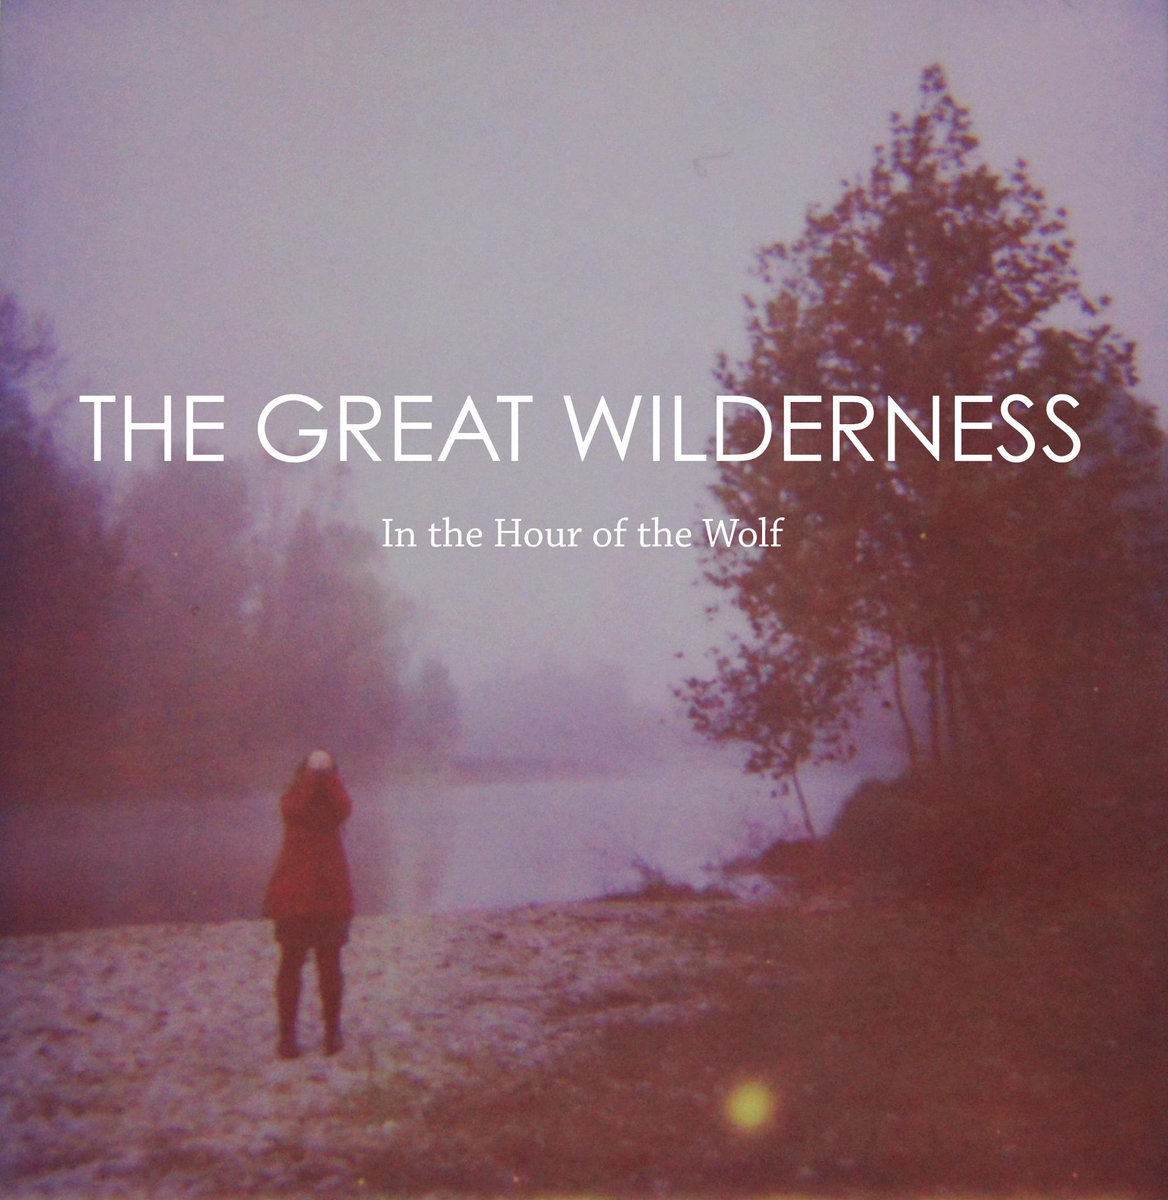 The Great Wilderness – In the Hour of the Wolf